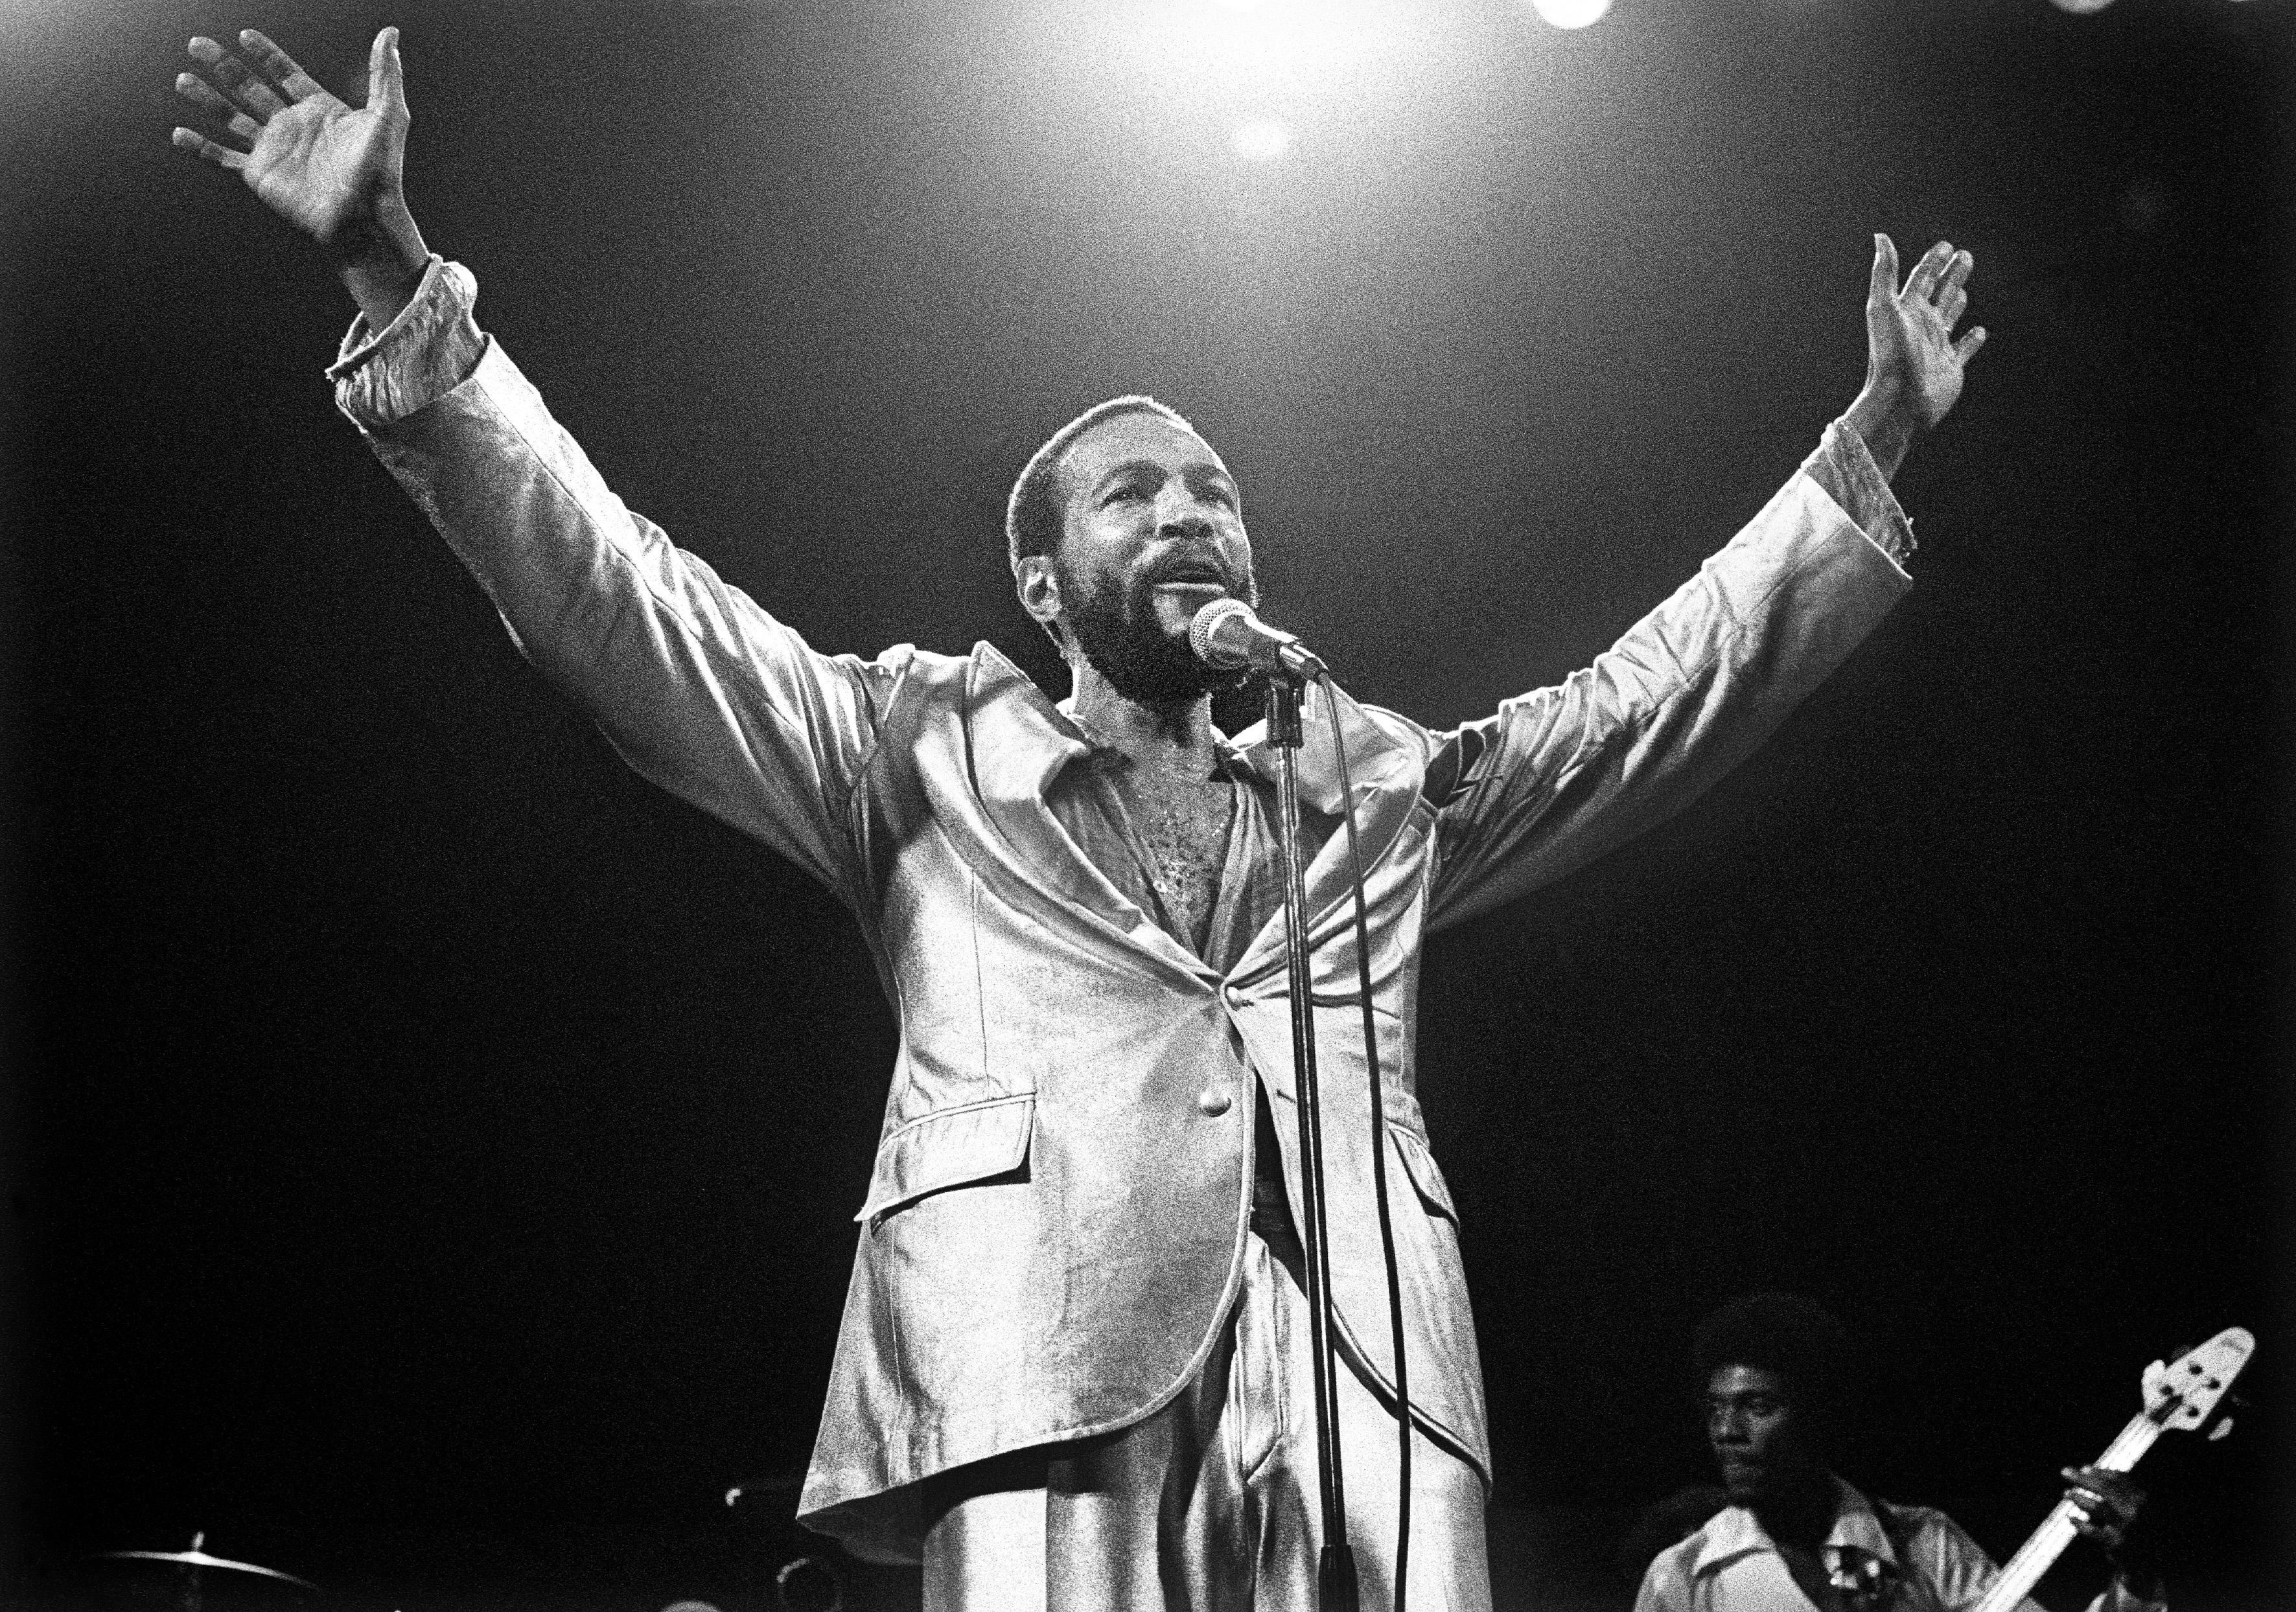 Stage marvin live gaye recorded on Motown's Tragic